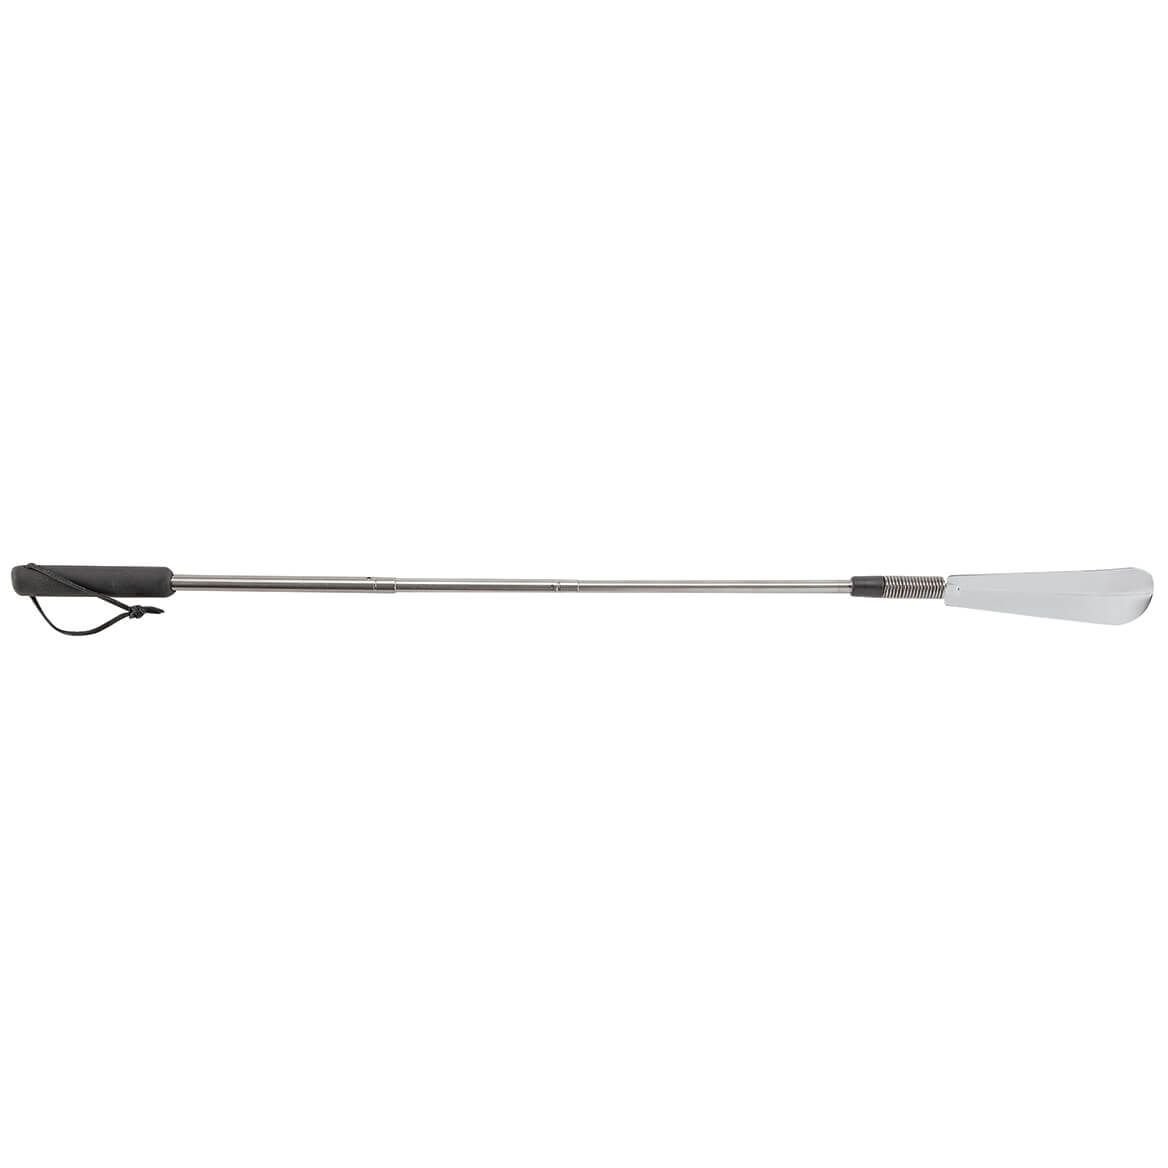 Stainless Steel Telescopic and Flexible Shoehorn by LivingSURE™ + '-' + 377061